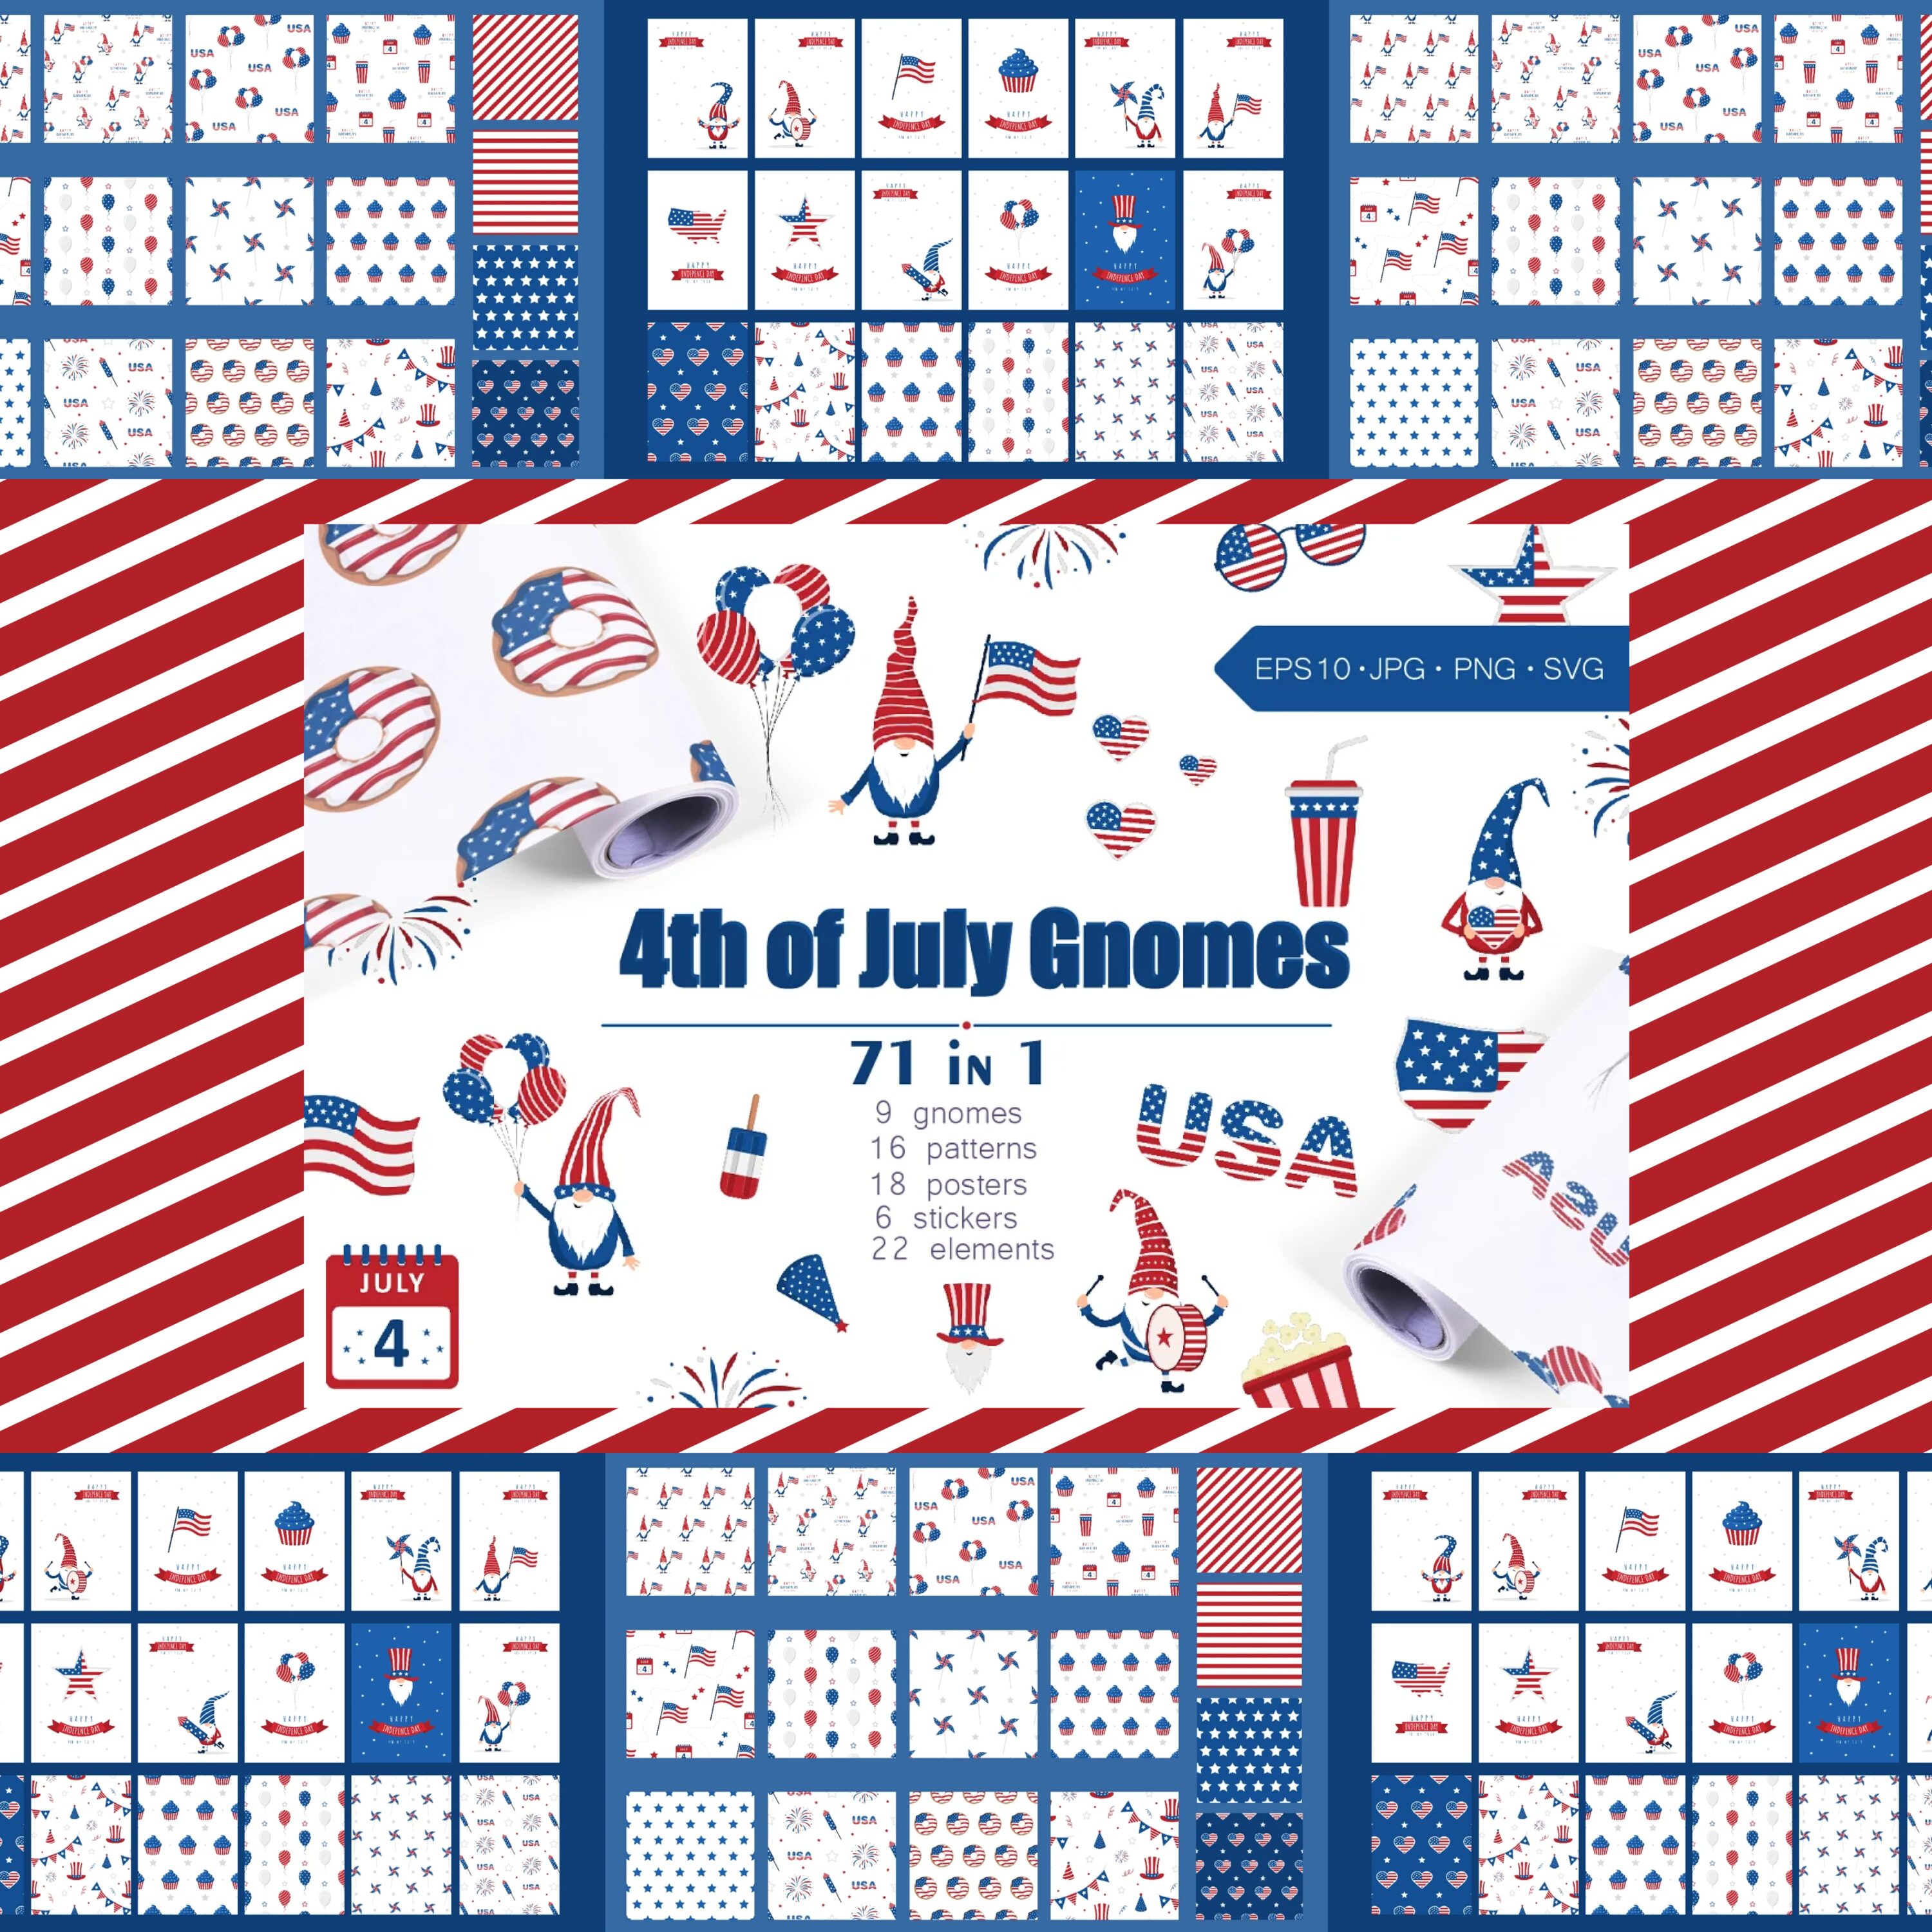 4th of July. Patriotic USA Gnomes cover image.